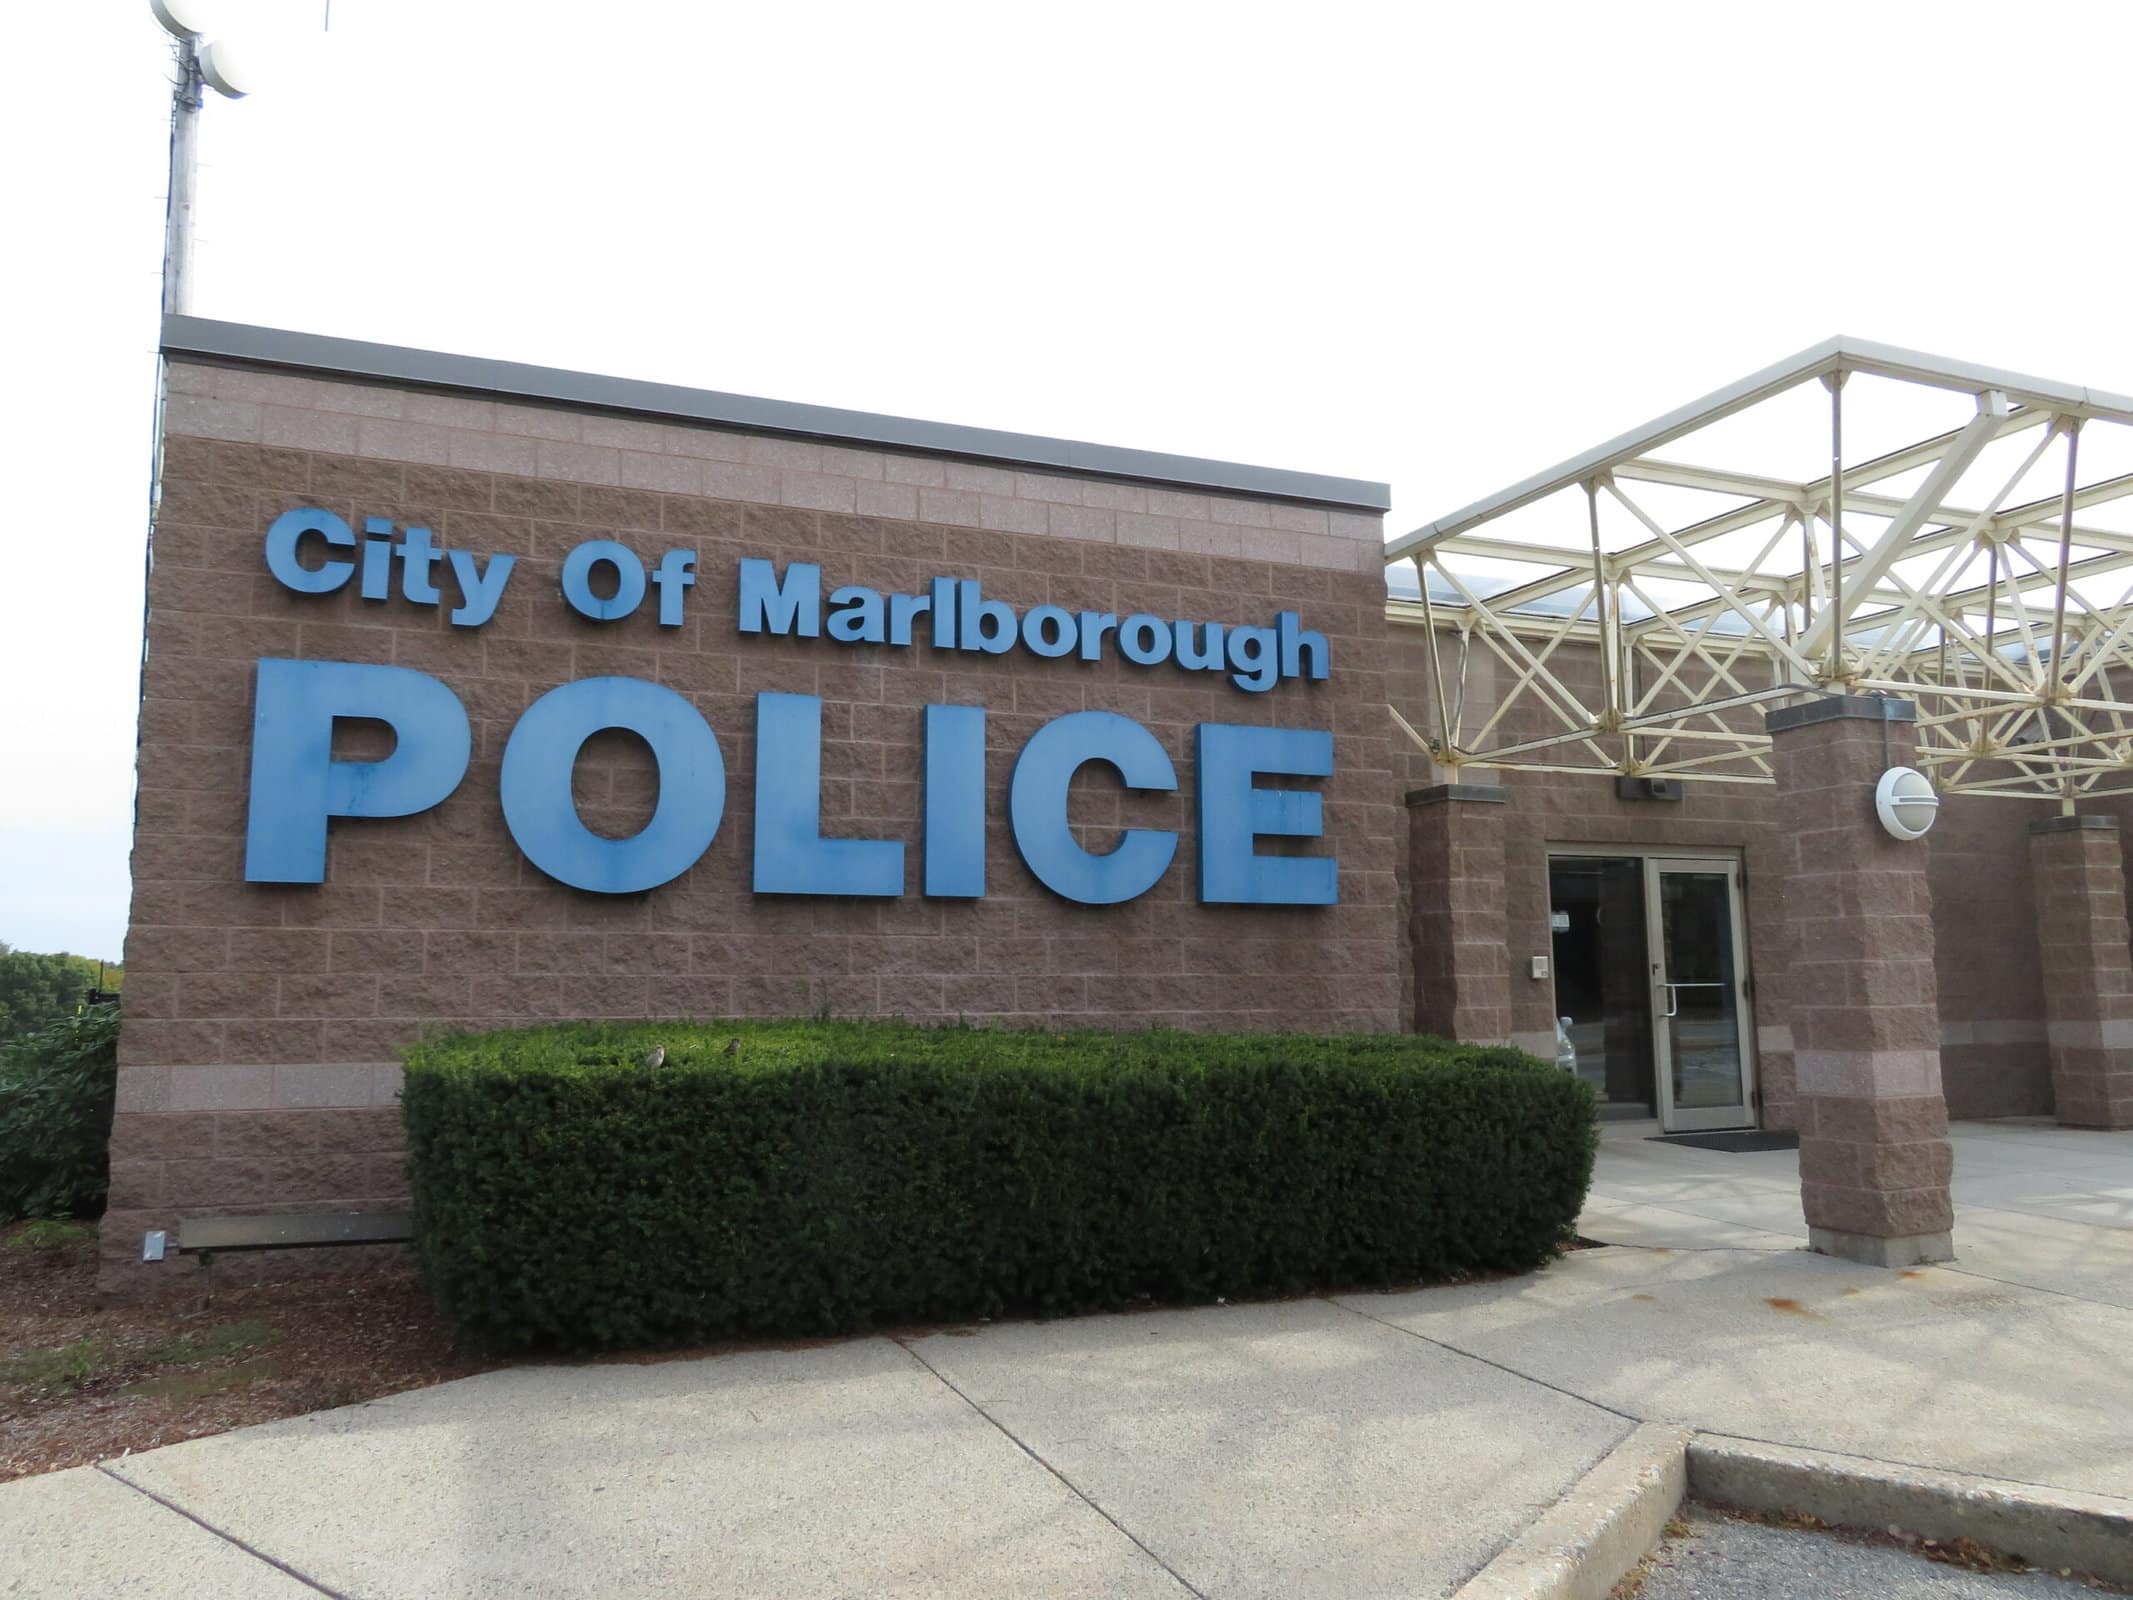 Assault in Price Chopper leads to arrest of Marlborough woman